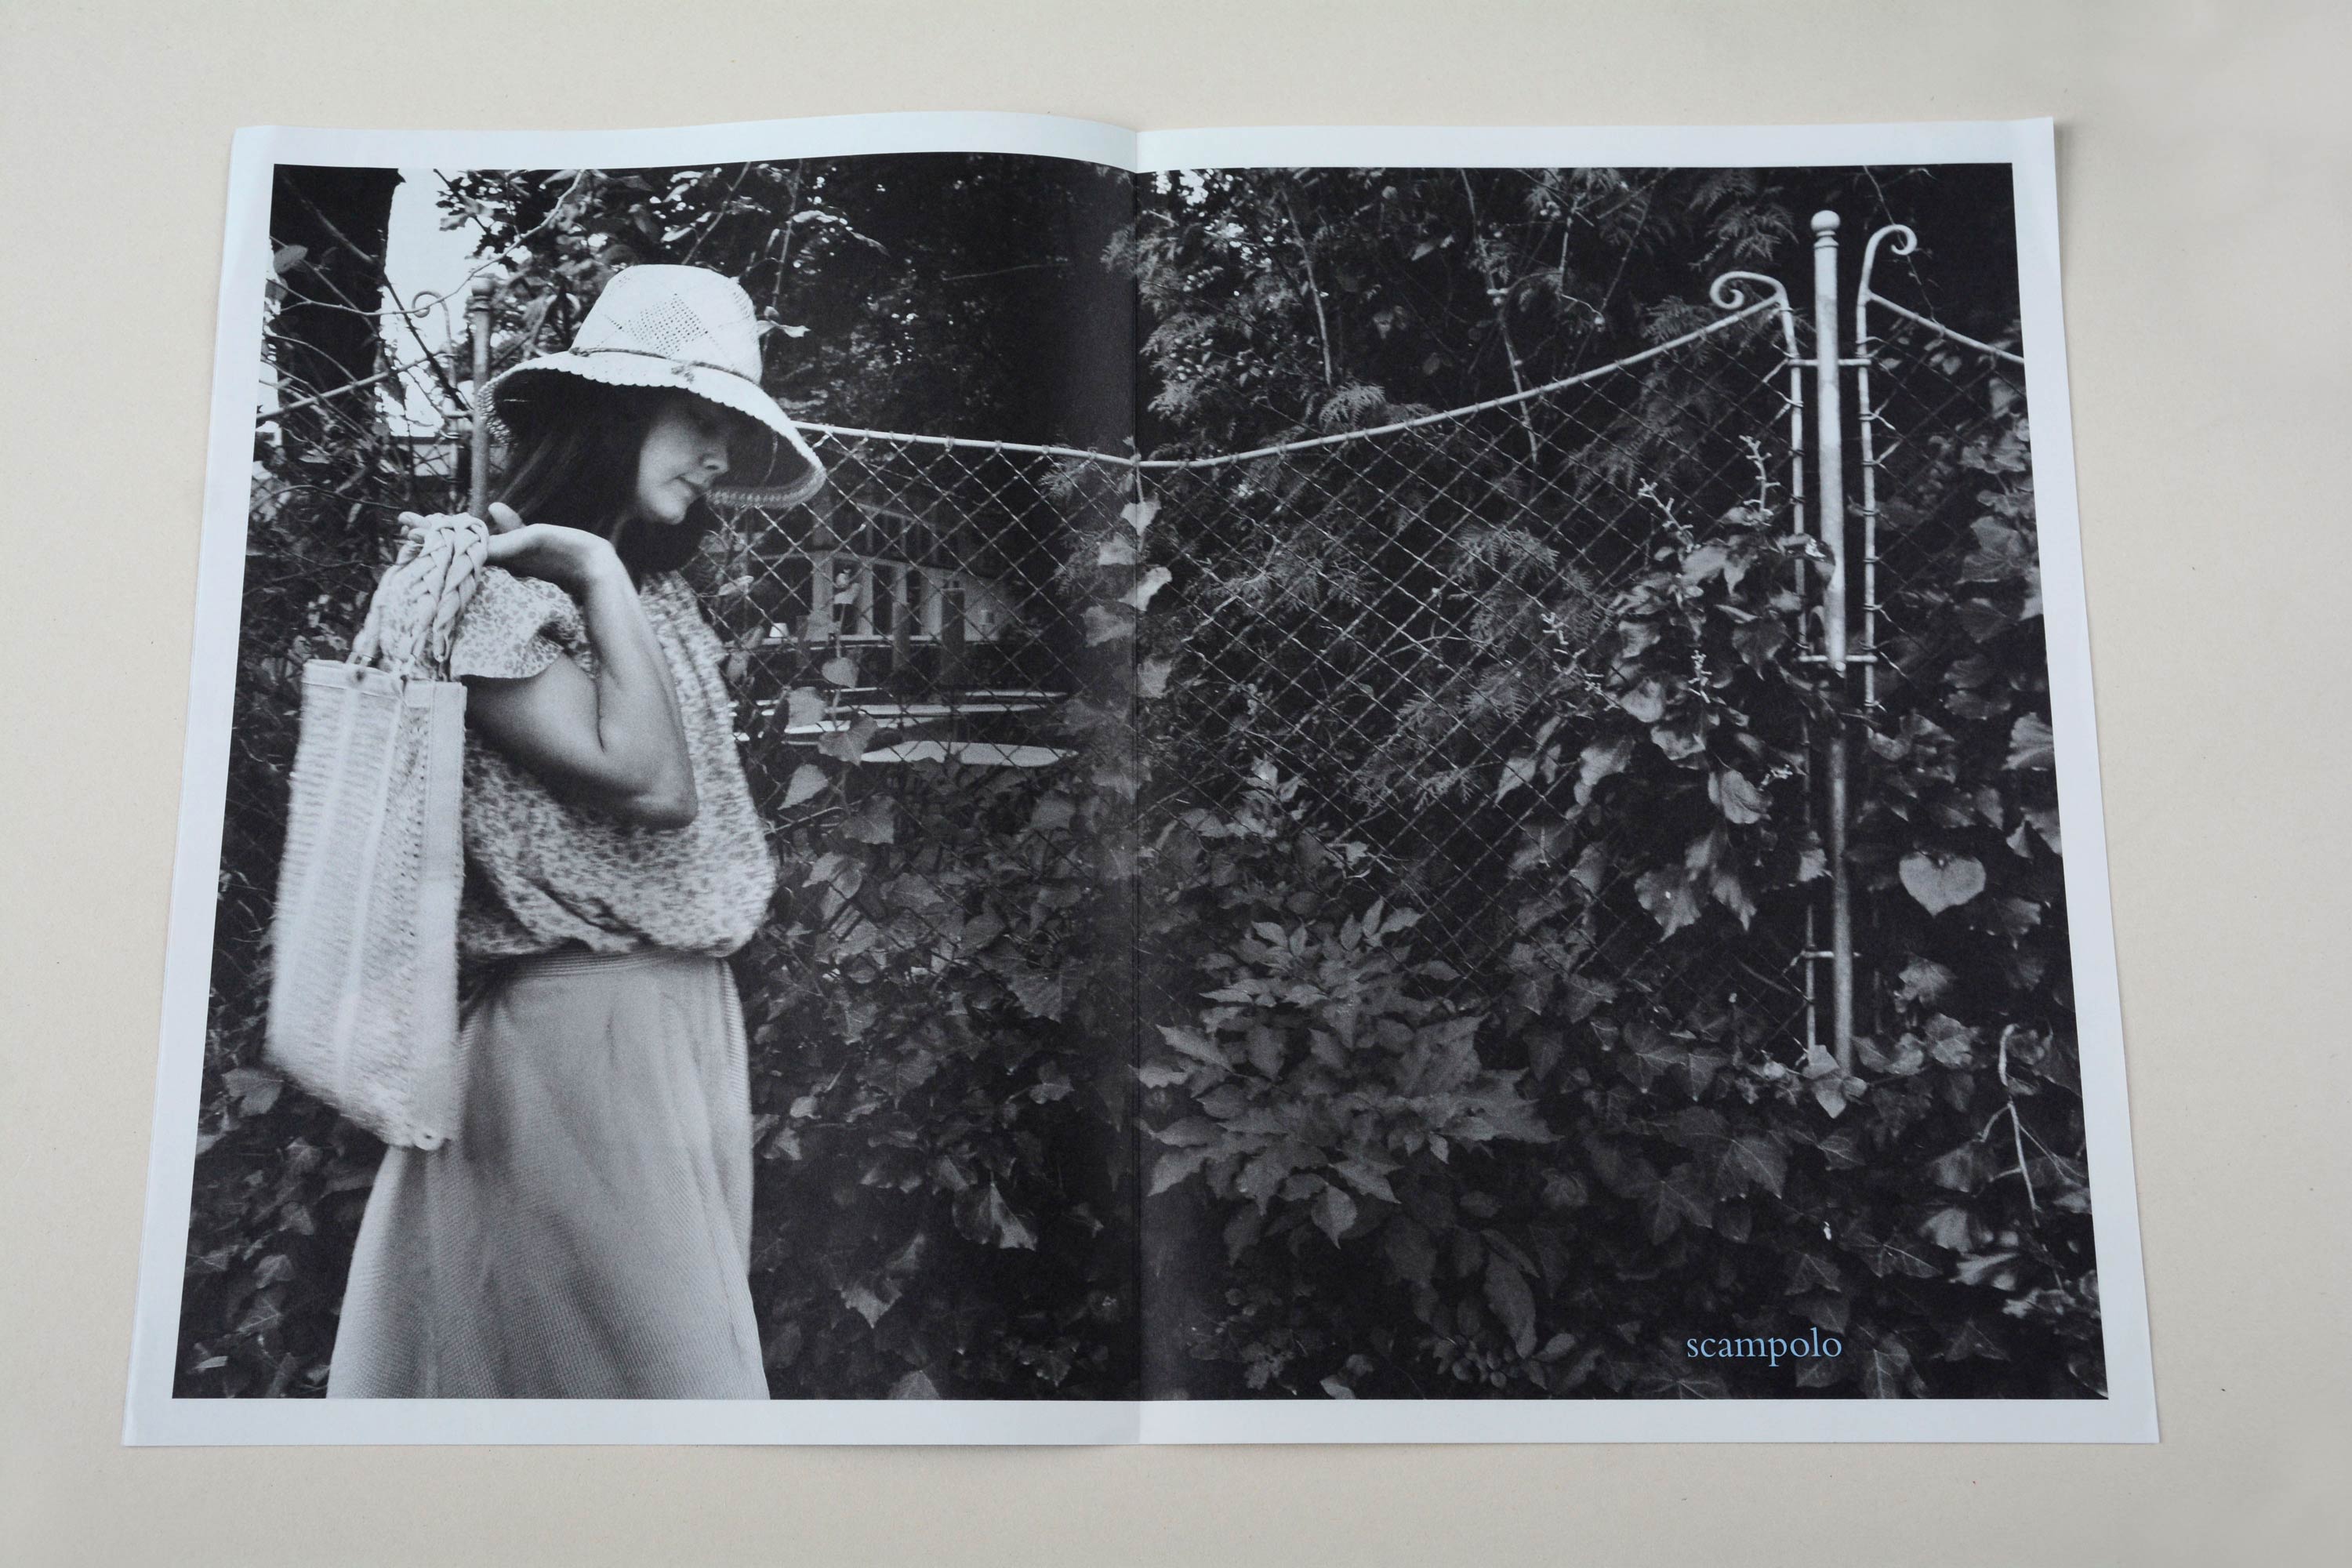 Double page. Full-page b/w photo with white space around stretches over both pages. Woman walking in front of iron grid fence. Bushes behind fence. Small font at bottom overlayed.